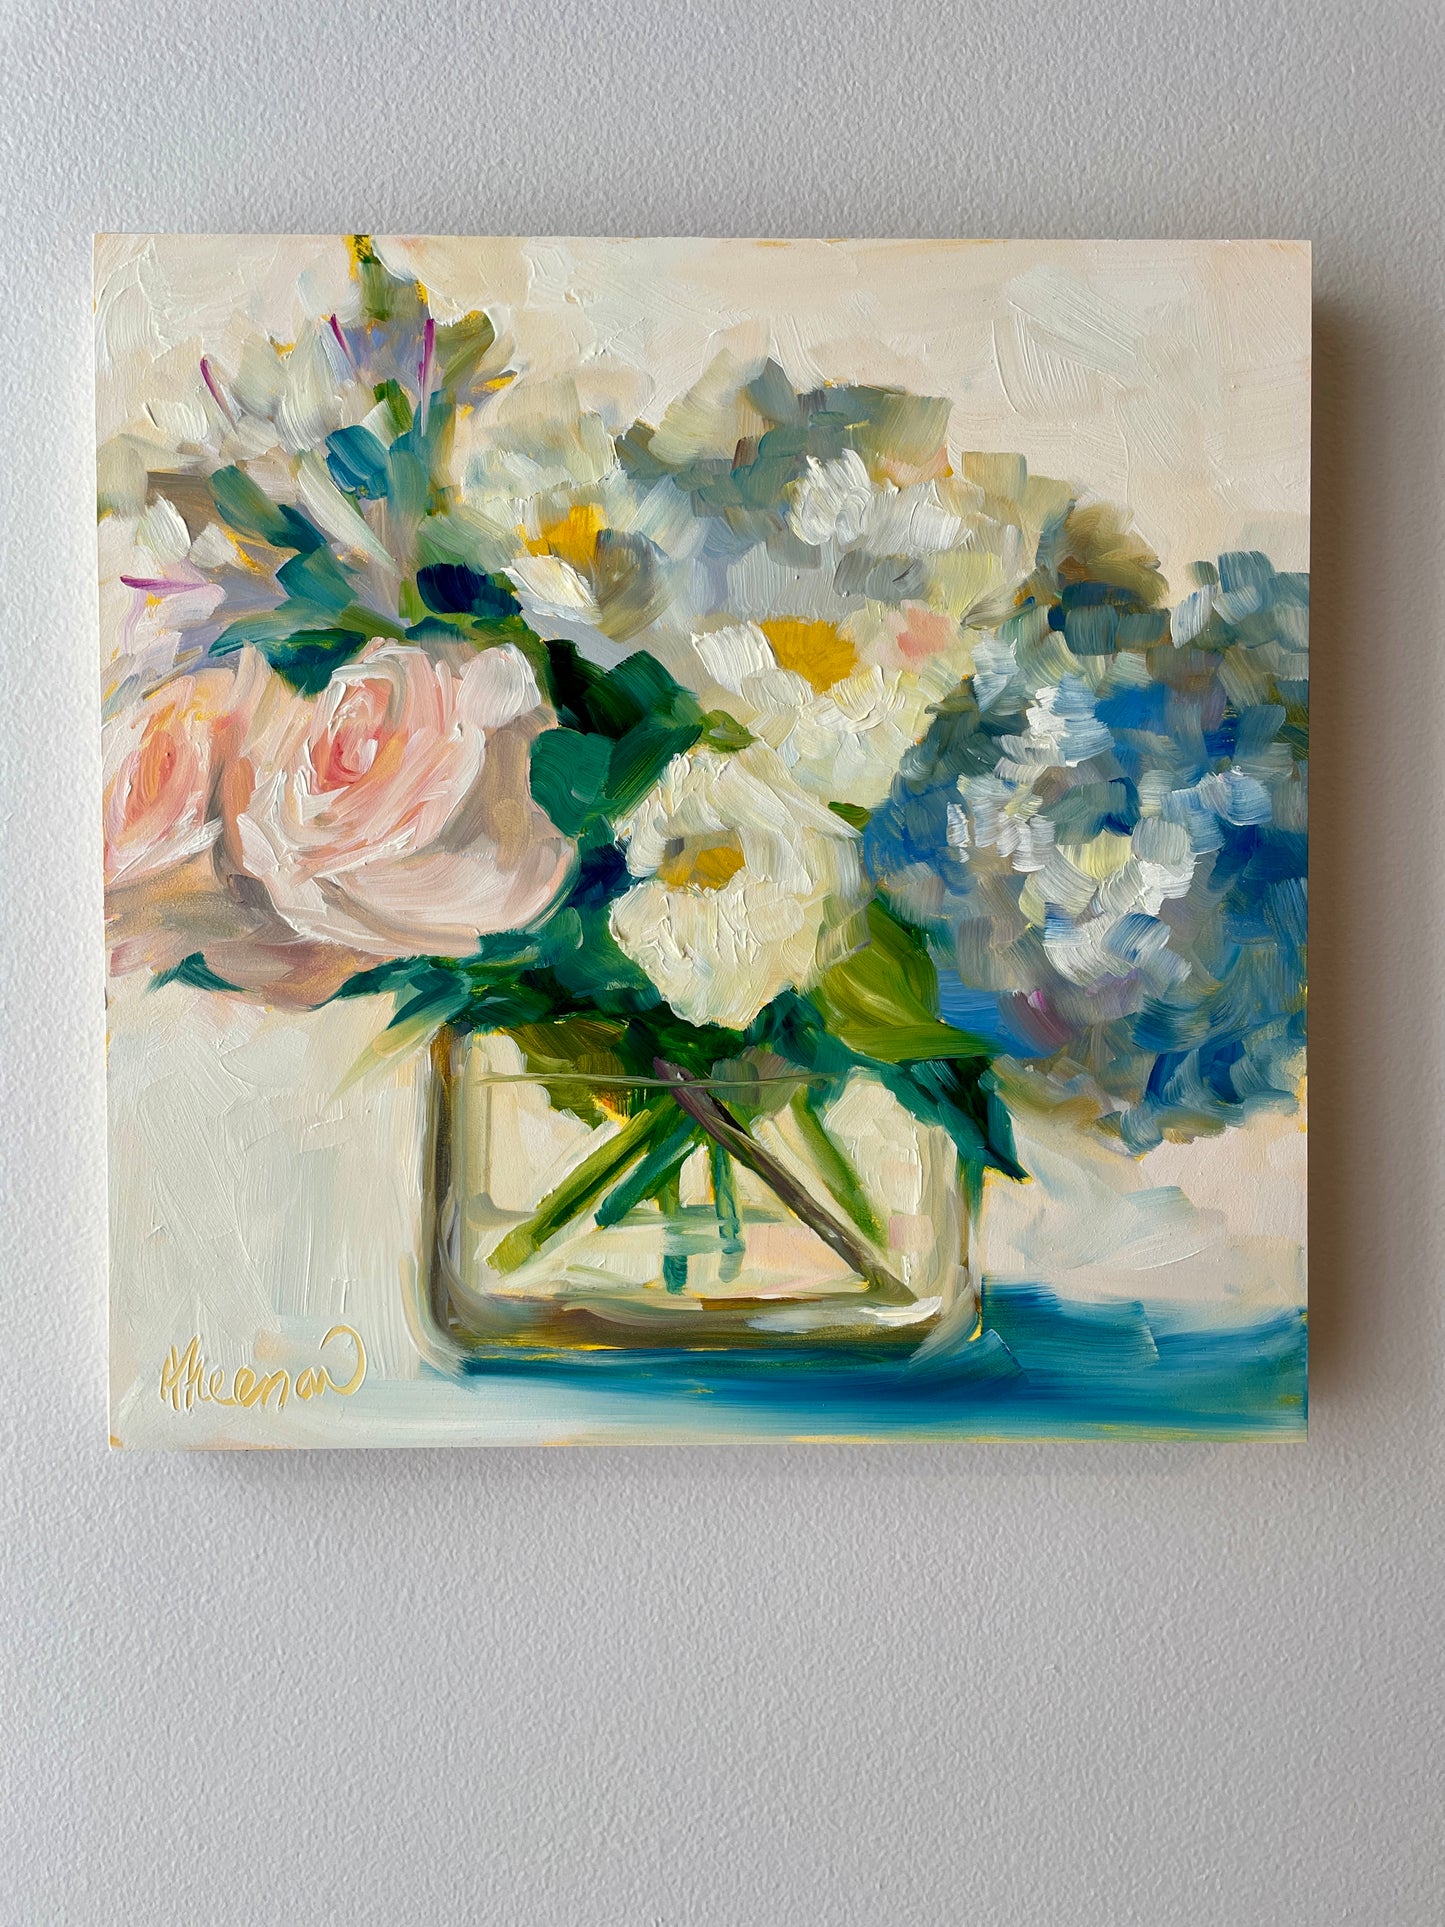 Pink Roses White Flowers and Blue Hydrangea, 10x10 Square, Original Oil Painting